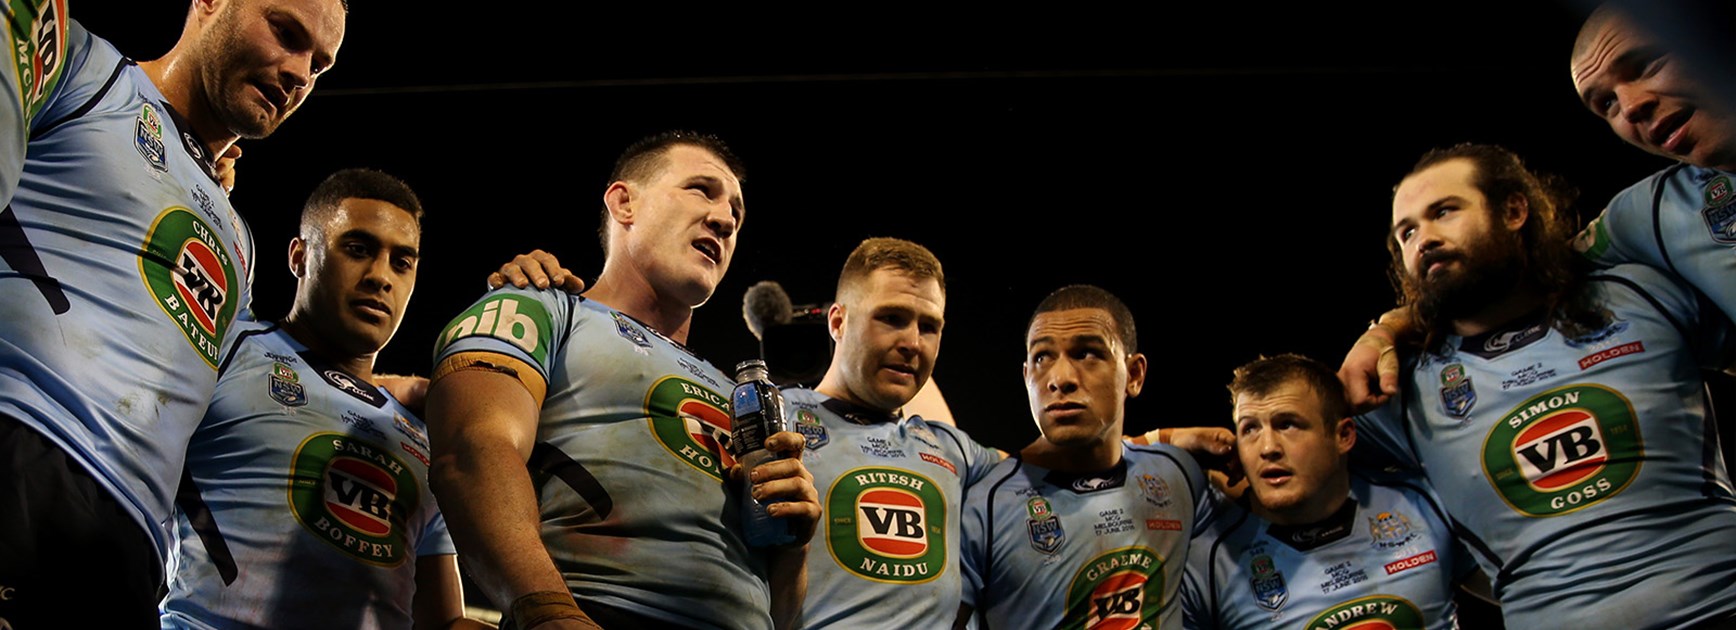 NSW huddle after winning Origin Game 2 at the MCG and sending the series to a decider.